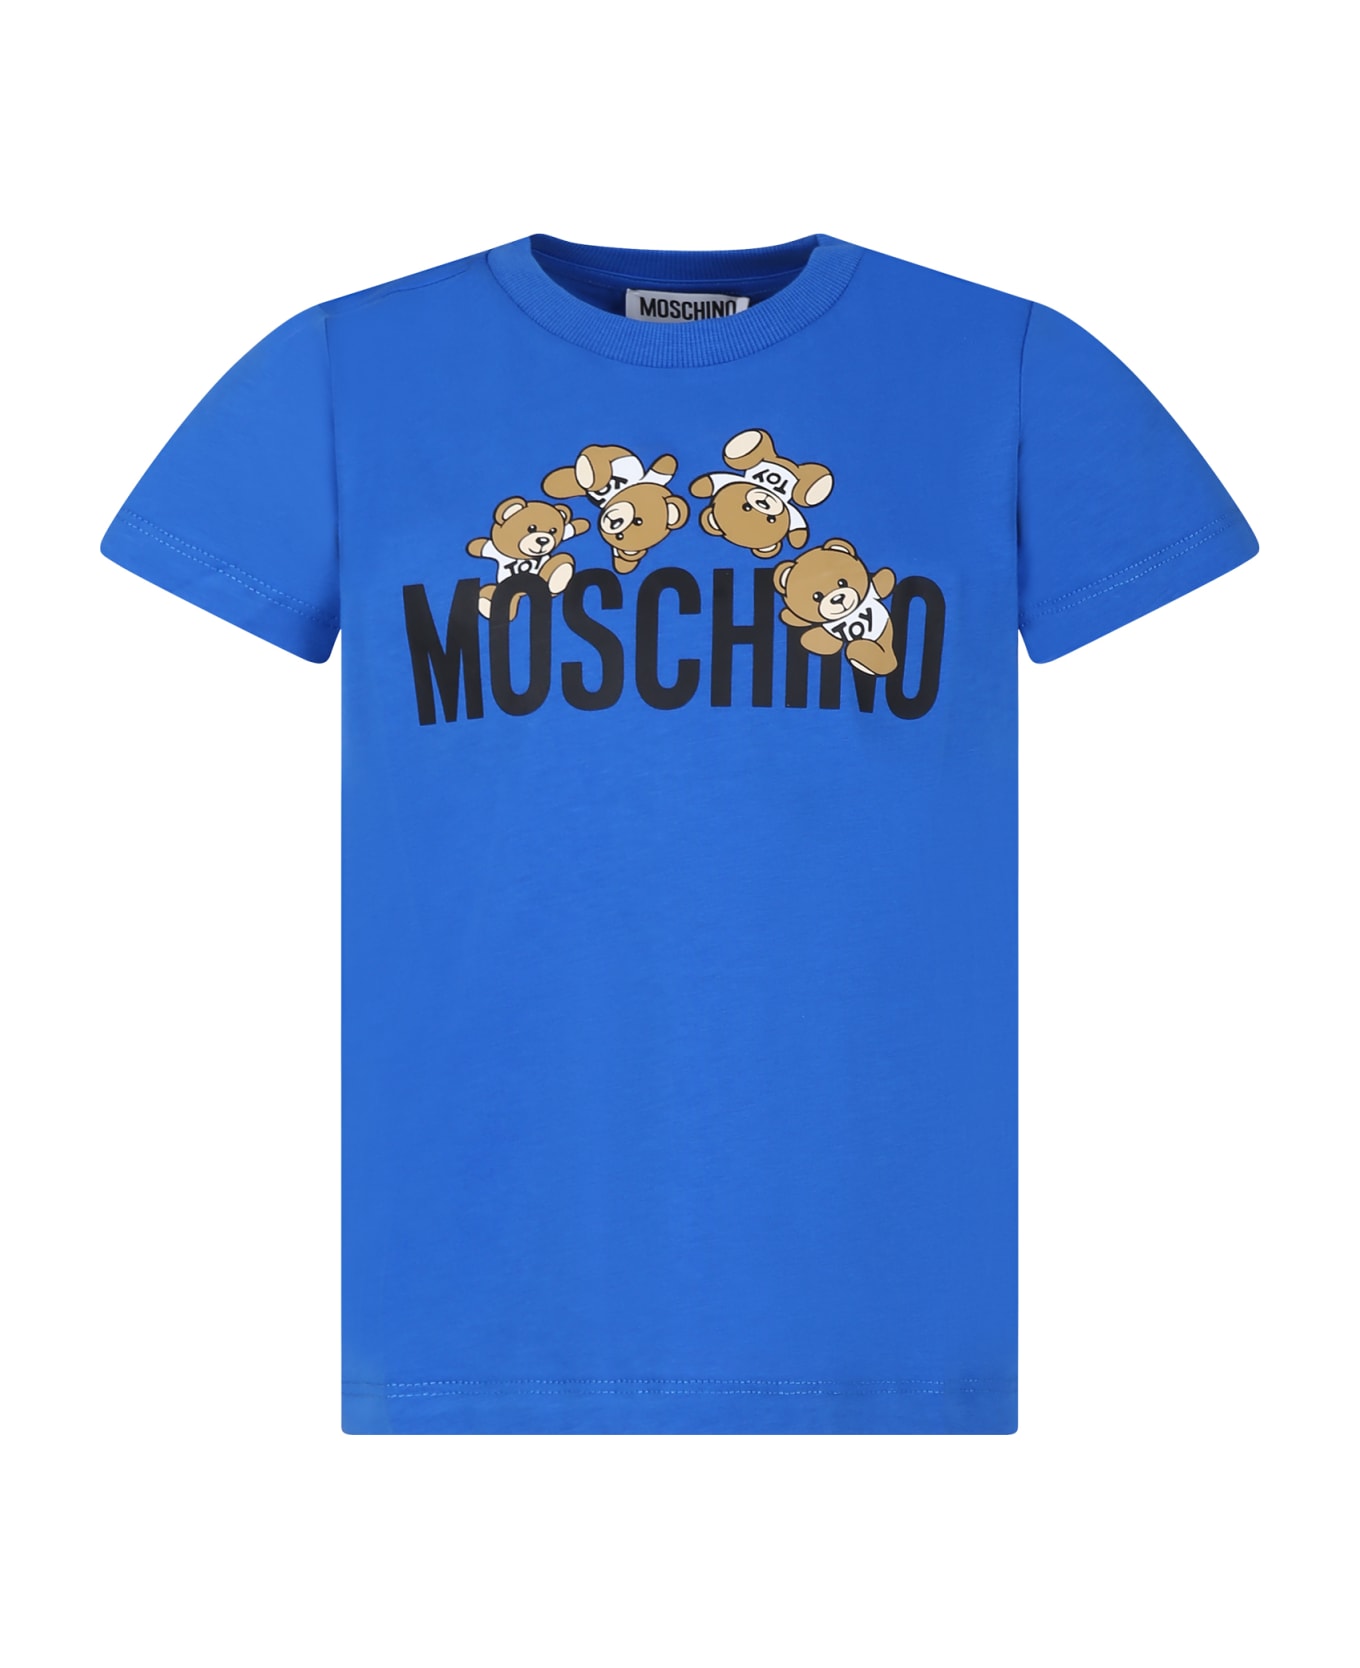 Moschino Blue T-shirt For Kids With Teddy Bears And Logo - Blue